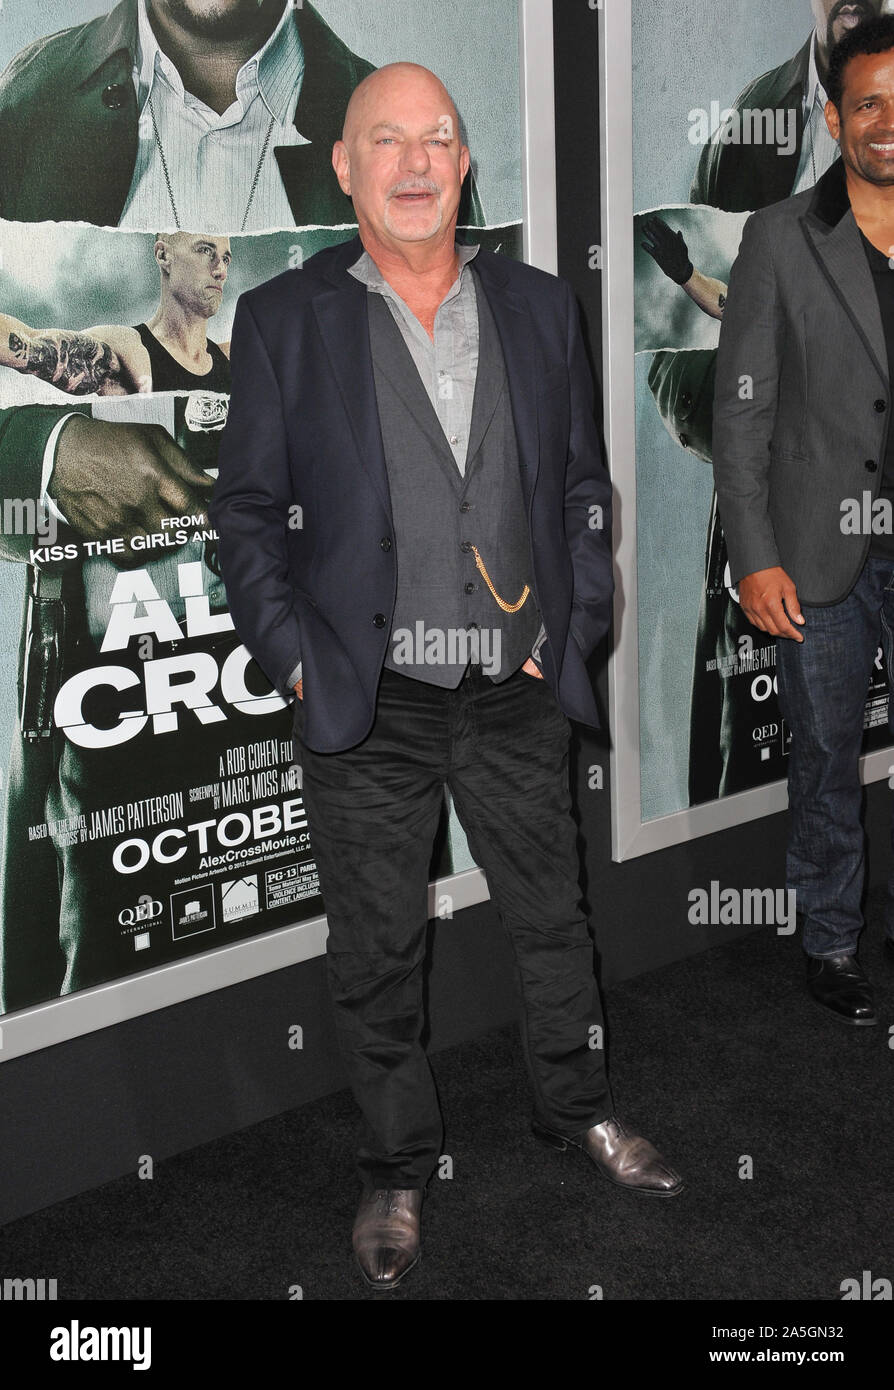 LOS ANGELES, CA. October 15, 2012: Director Rob Cohen at the Los Angeles premiere of his movie 'Alex Cross' at the Cinerama Dome, Hollywood. © 2012 Paul Smith / Featureflash Stock Photo